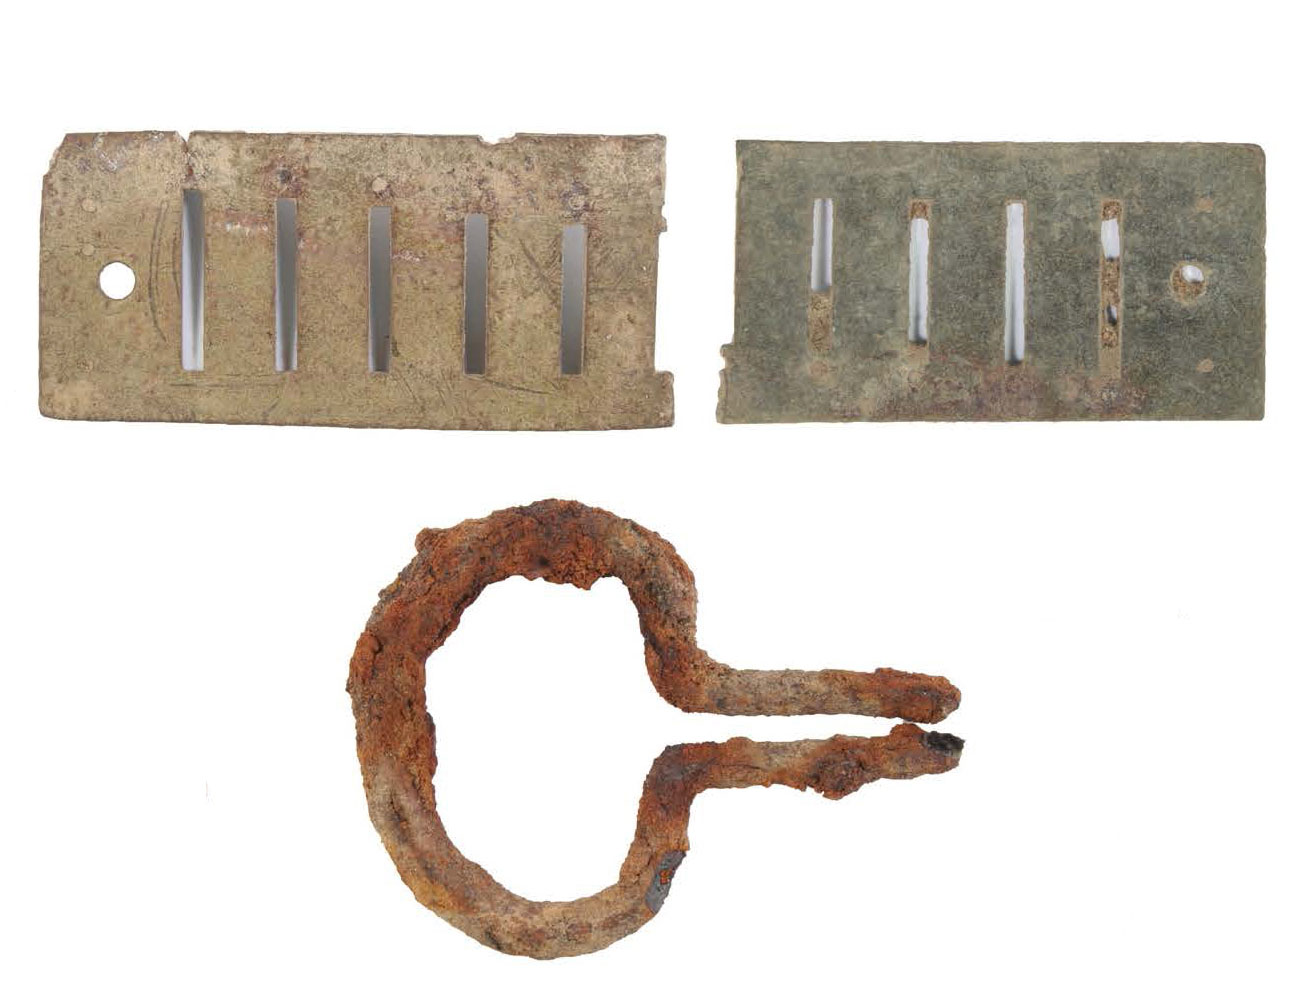 Photograph of metal musical instrument parts on a white background with a scale bar.